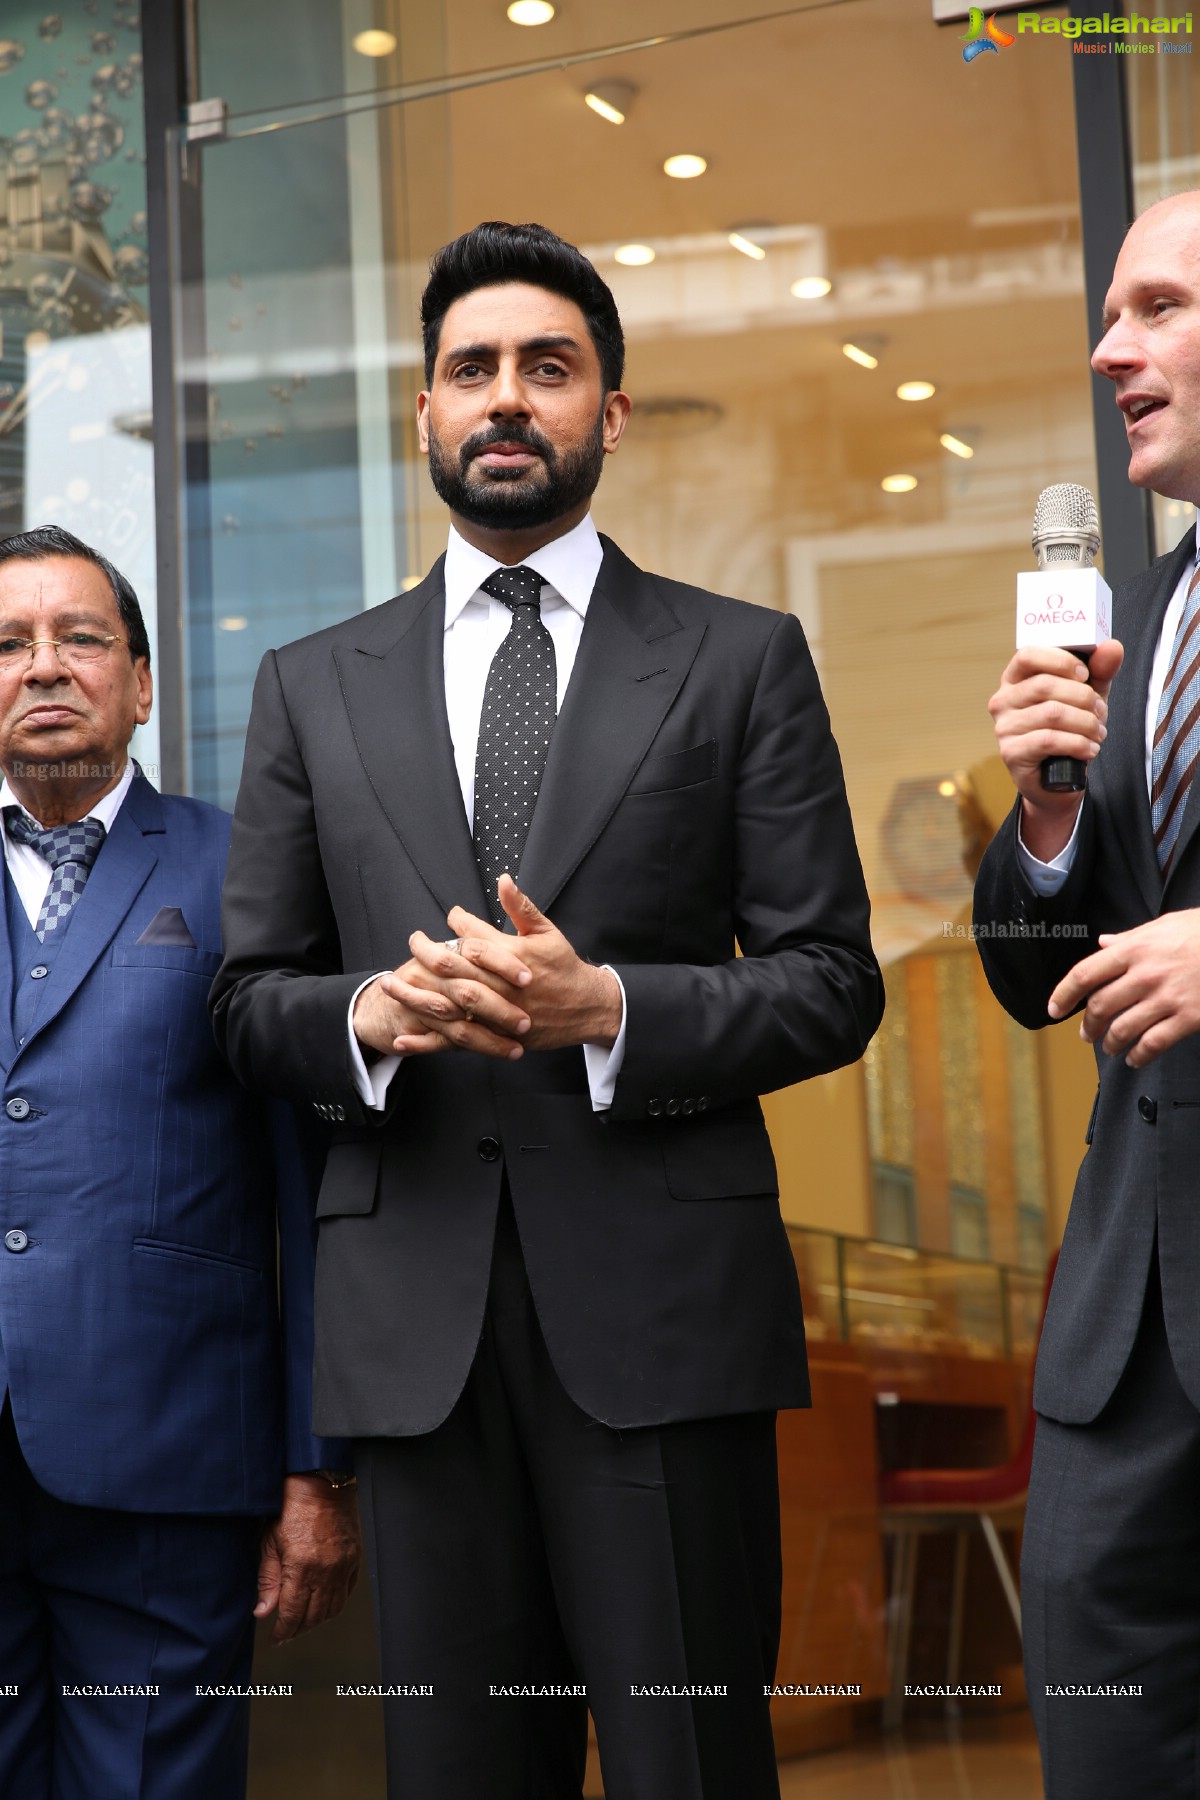 Abhishek Bachchan launches OMEGA Boutique & Seamaster Diver 300M Watch at Omega Boutique, Jubilee Hills, Hyderabad